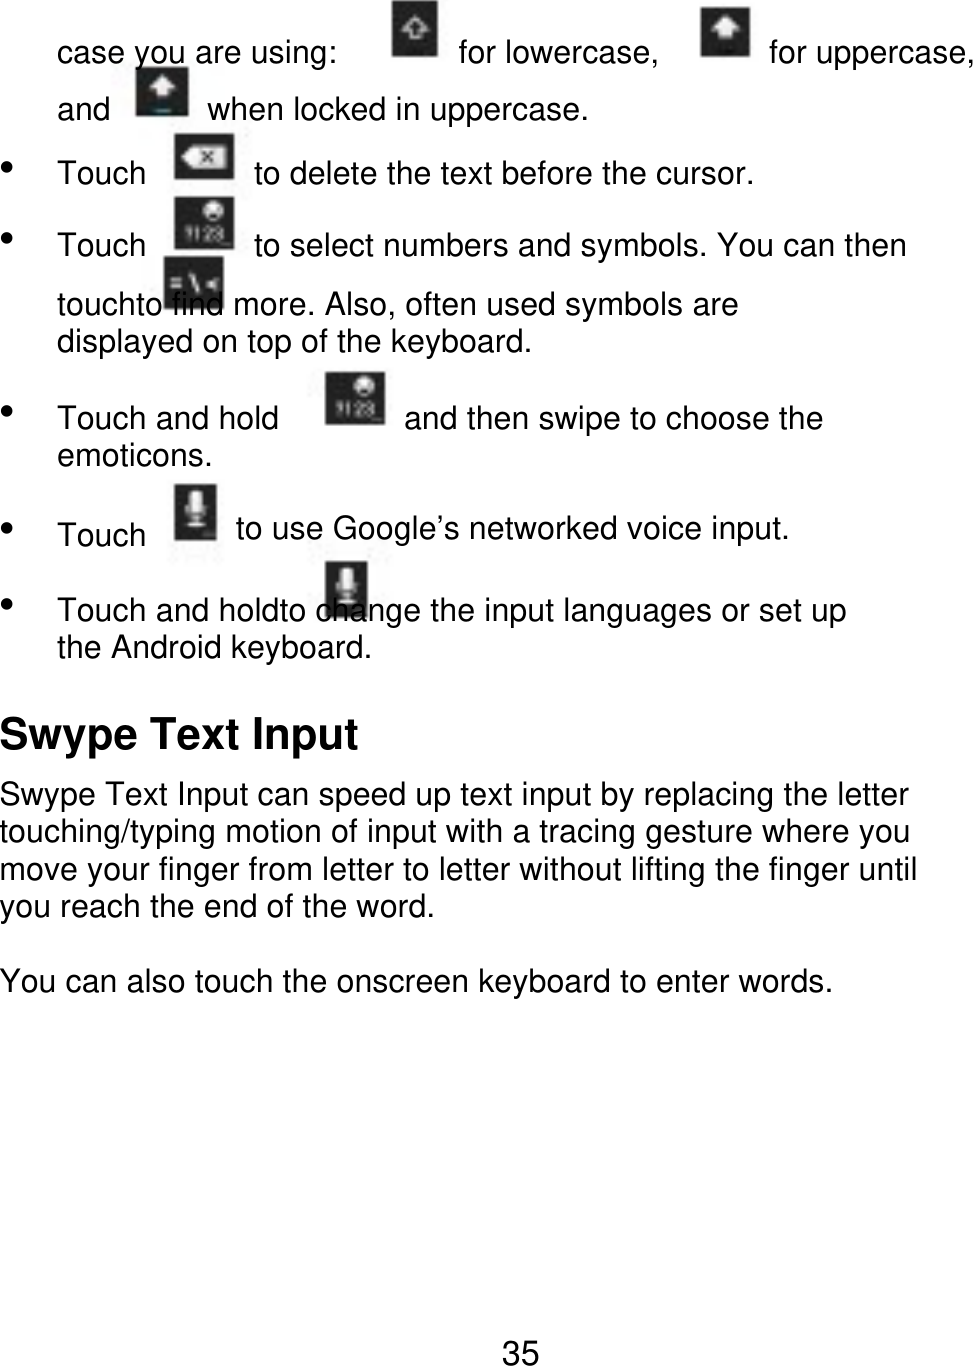 case you are using: and   Touch Touch for lowercase, for uppercase, when locked in uppercase. to delete the text before the cursor. to select numbers and symbols. You can then touchto find more. Also, often used symbols are displayed on top of the keyboard.    Touch and hold emoticons. Touch and then swipe to choose the to use Google’s networked voice input. Touch and holdto change the input languages or set up the Android keyboard. Swype Text Input Swype Text Input can speed up text input by replacing the letter touching/typing motion of input with a tracing gesture where you move your finger from letter to letter without lifting the finger until you reach the end of the word. You can also touch the onscreen keyboard to enter words. 35 